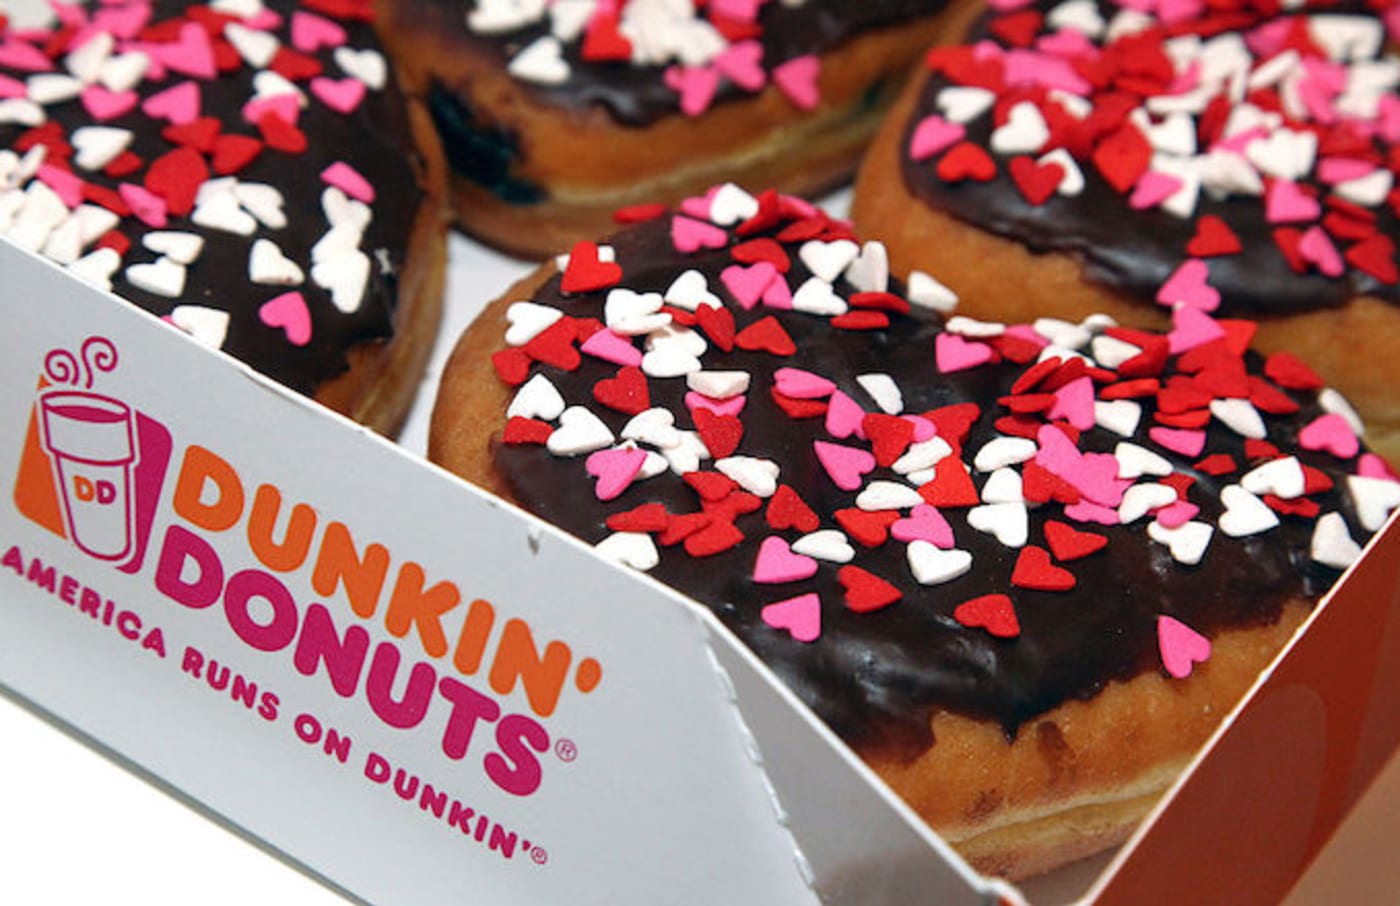 Dunkin’ Donuts Is Testing Out a New Name Complex